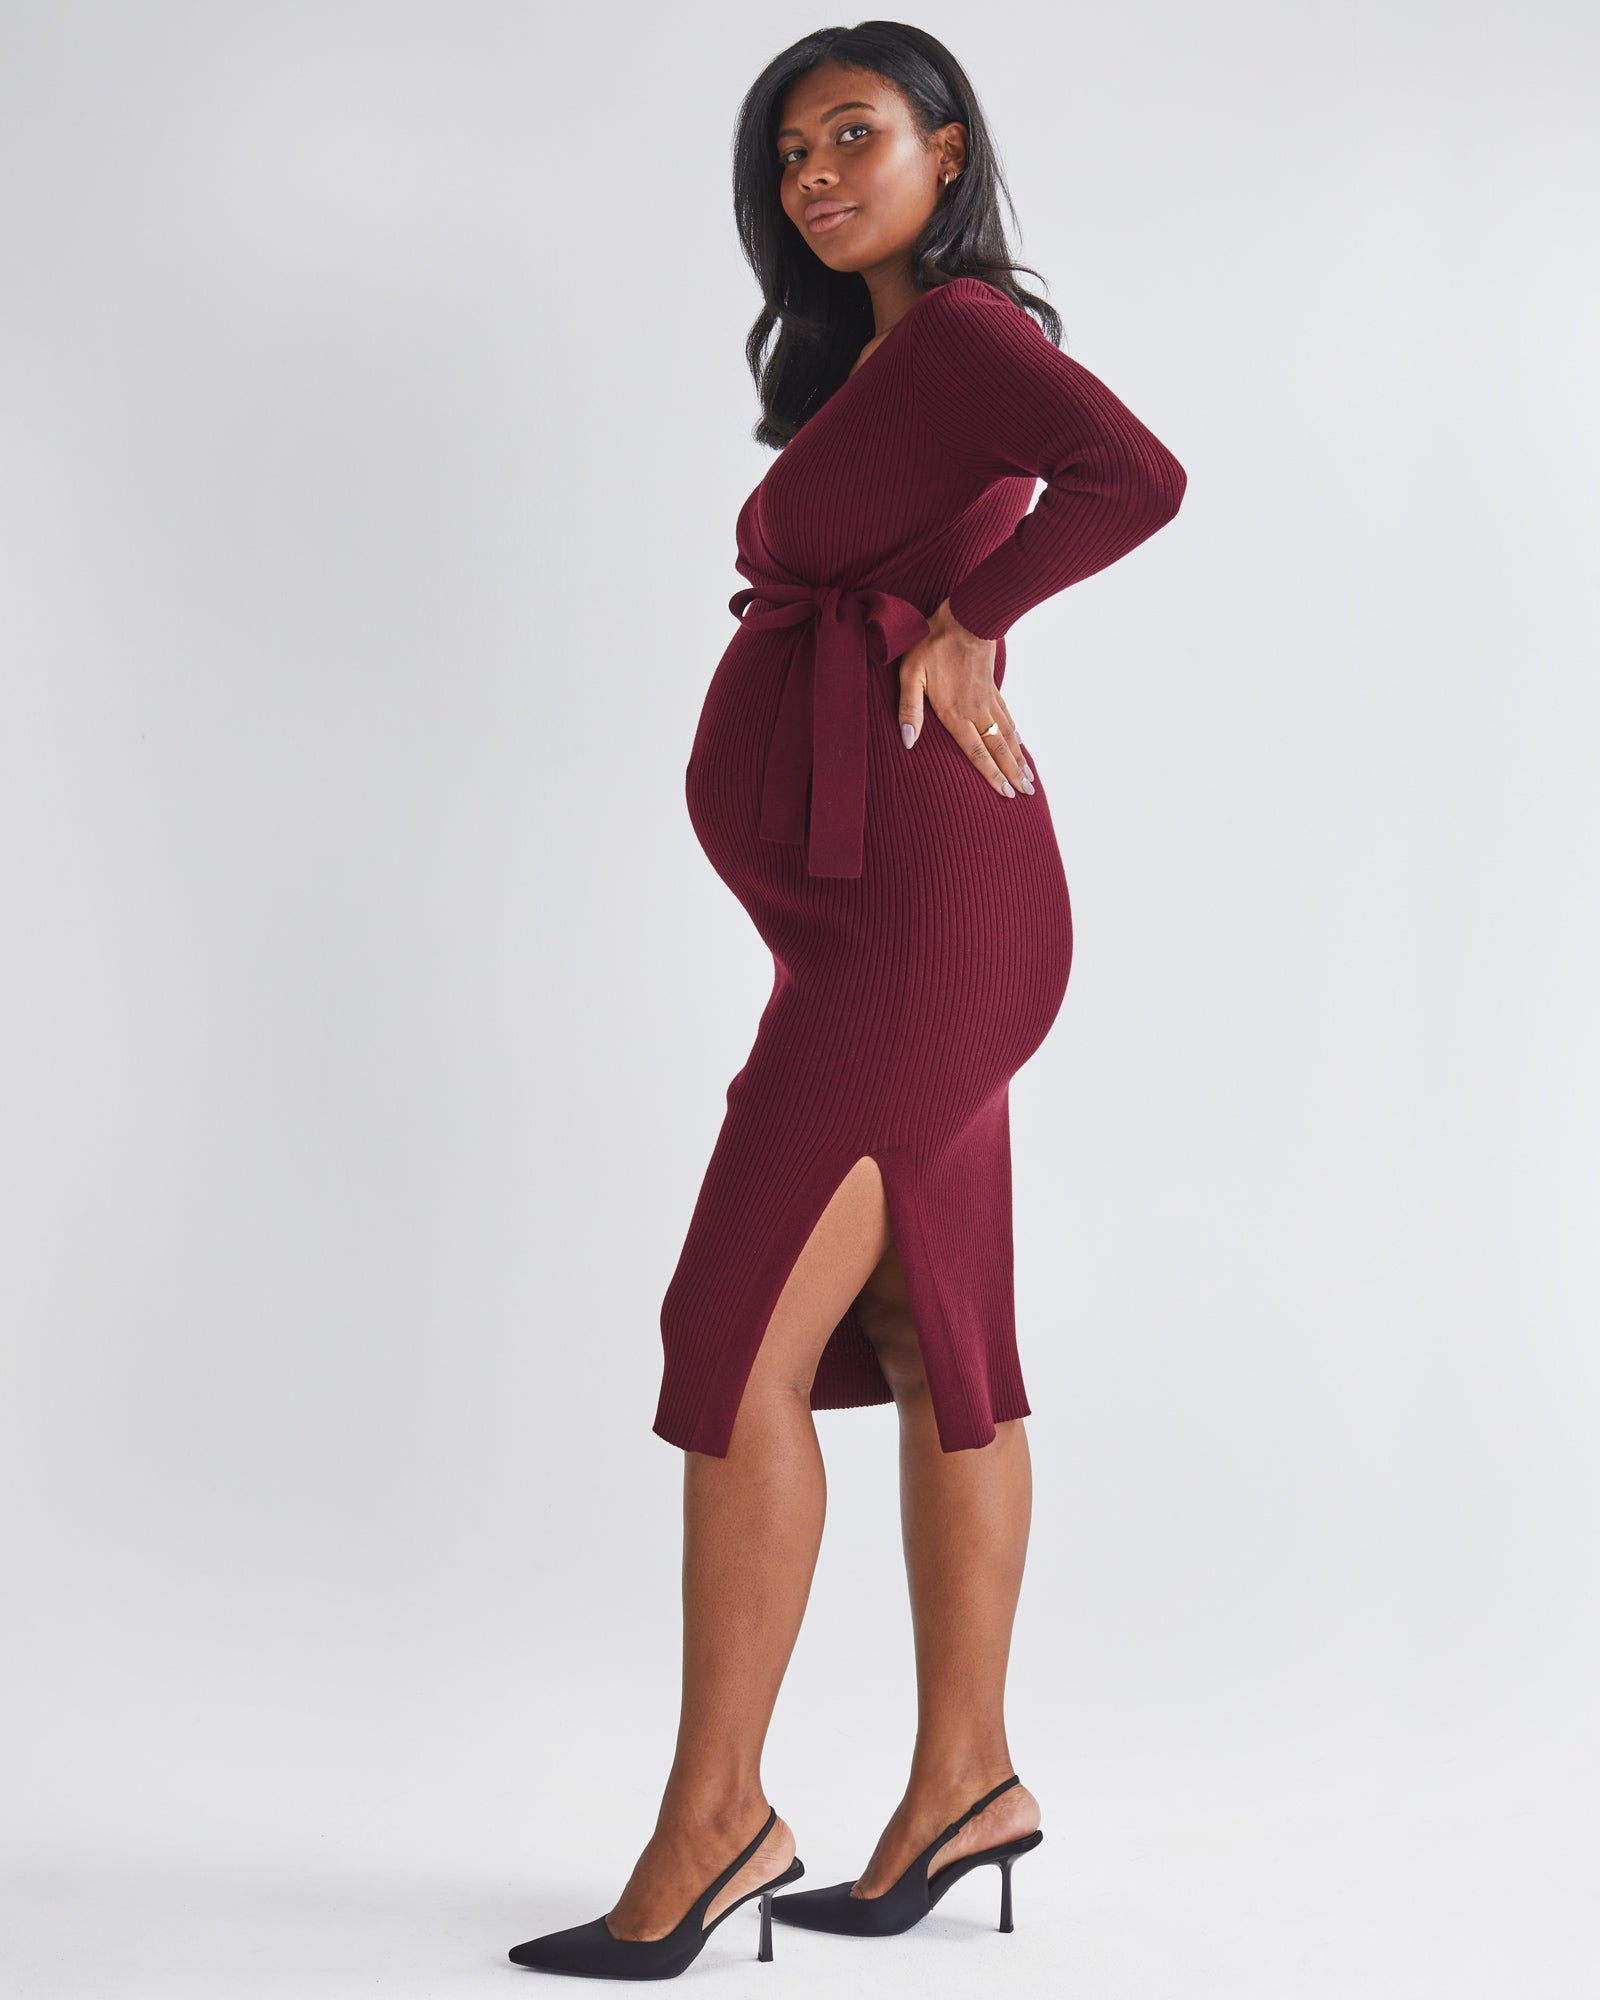 Side View - A Pregnannt Woman Wearing Lucille Full Sleeve Knit Maternity Midi Dress in Burgundy  from Angel Maternity.